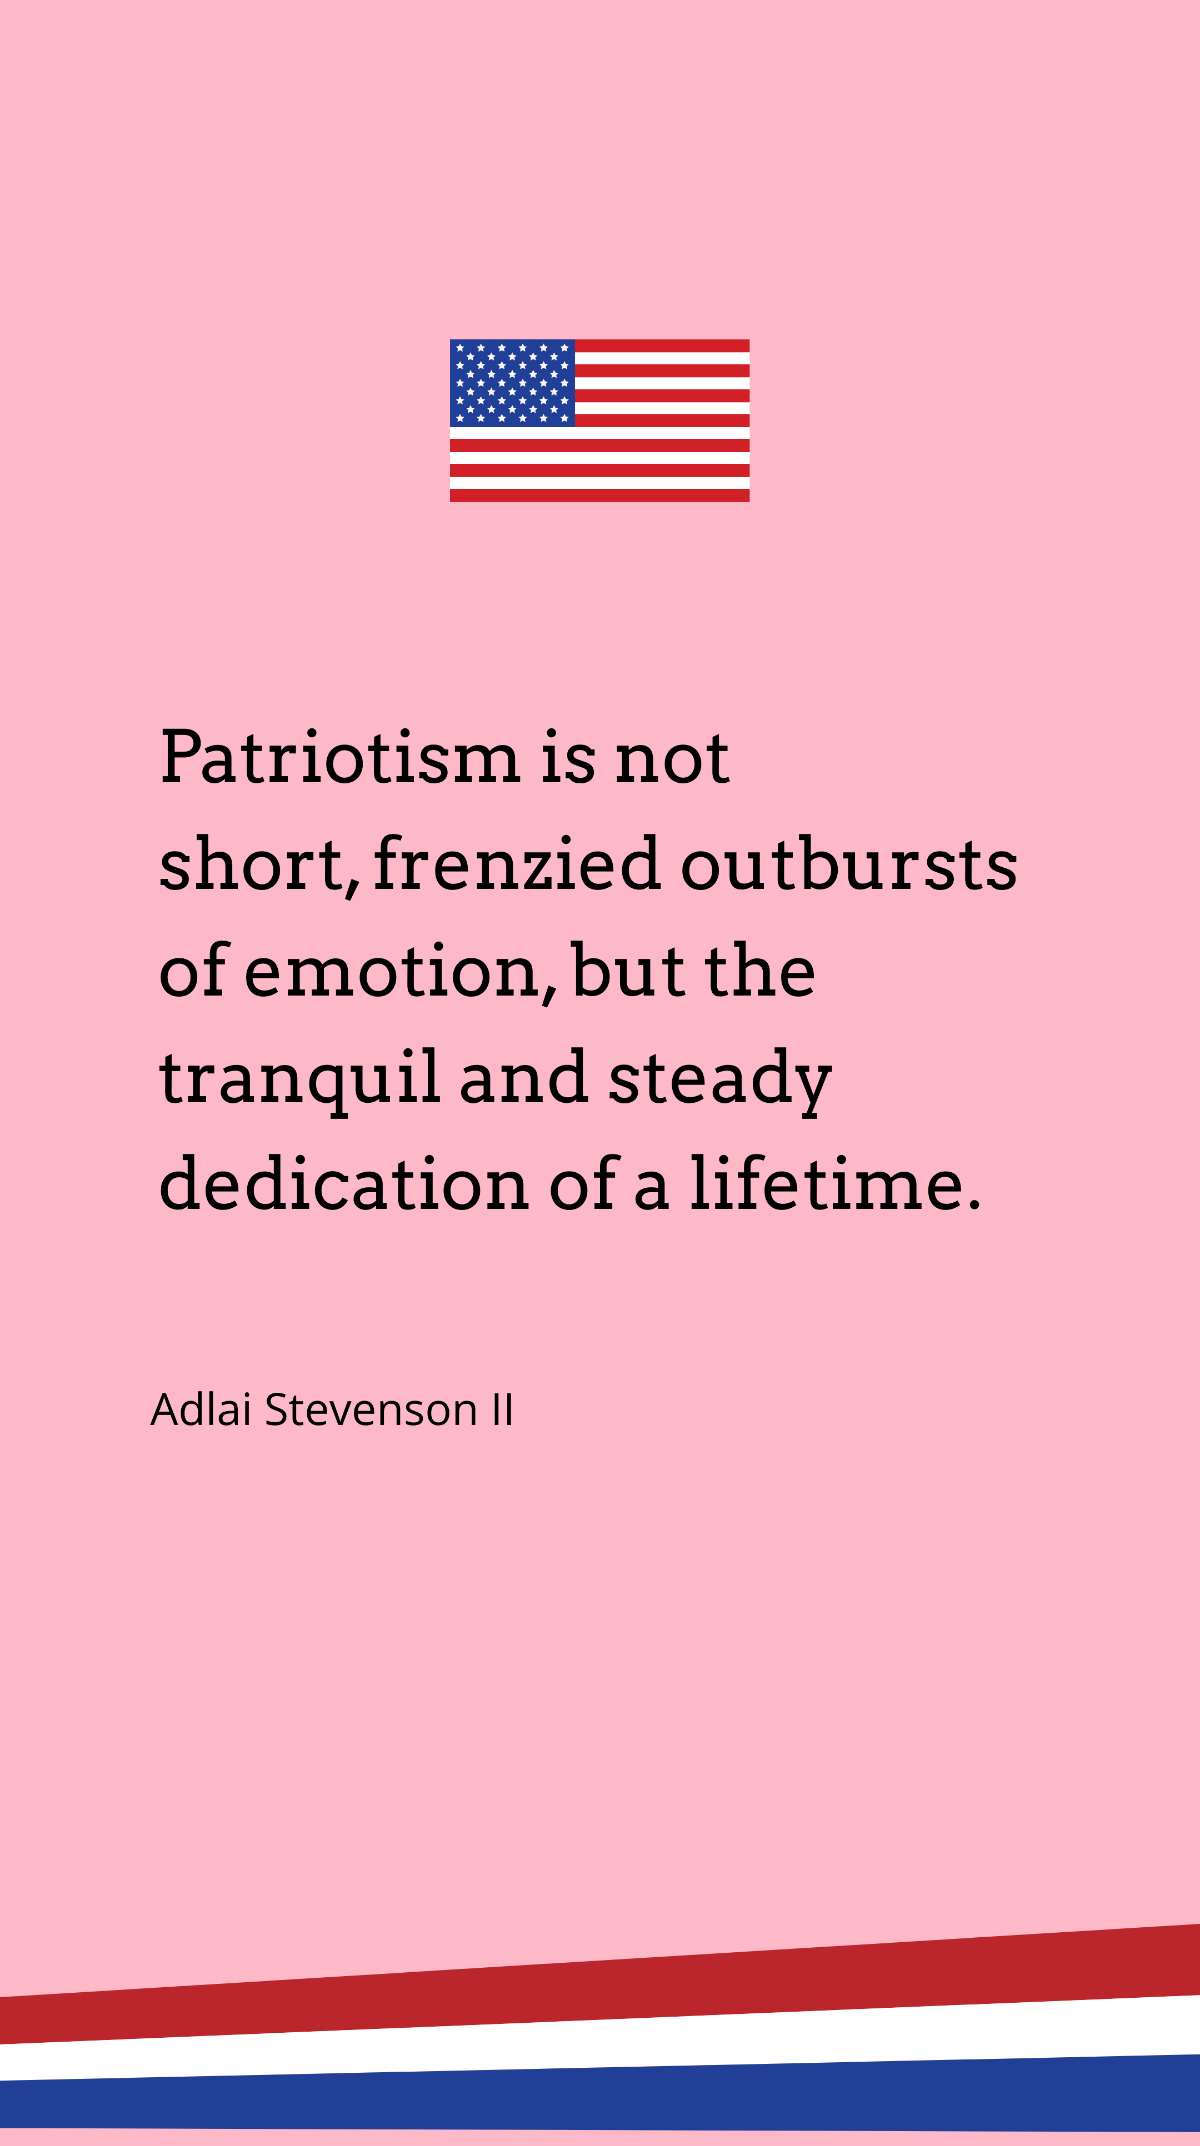 Free Adlai Stevenson II - “Patriotism is not short, frenzied outbursts of emotion, but the tranquil and steady dedication of a lifetime.” Template